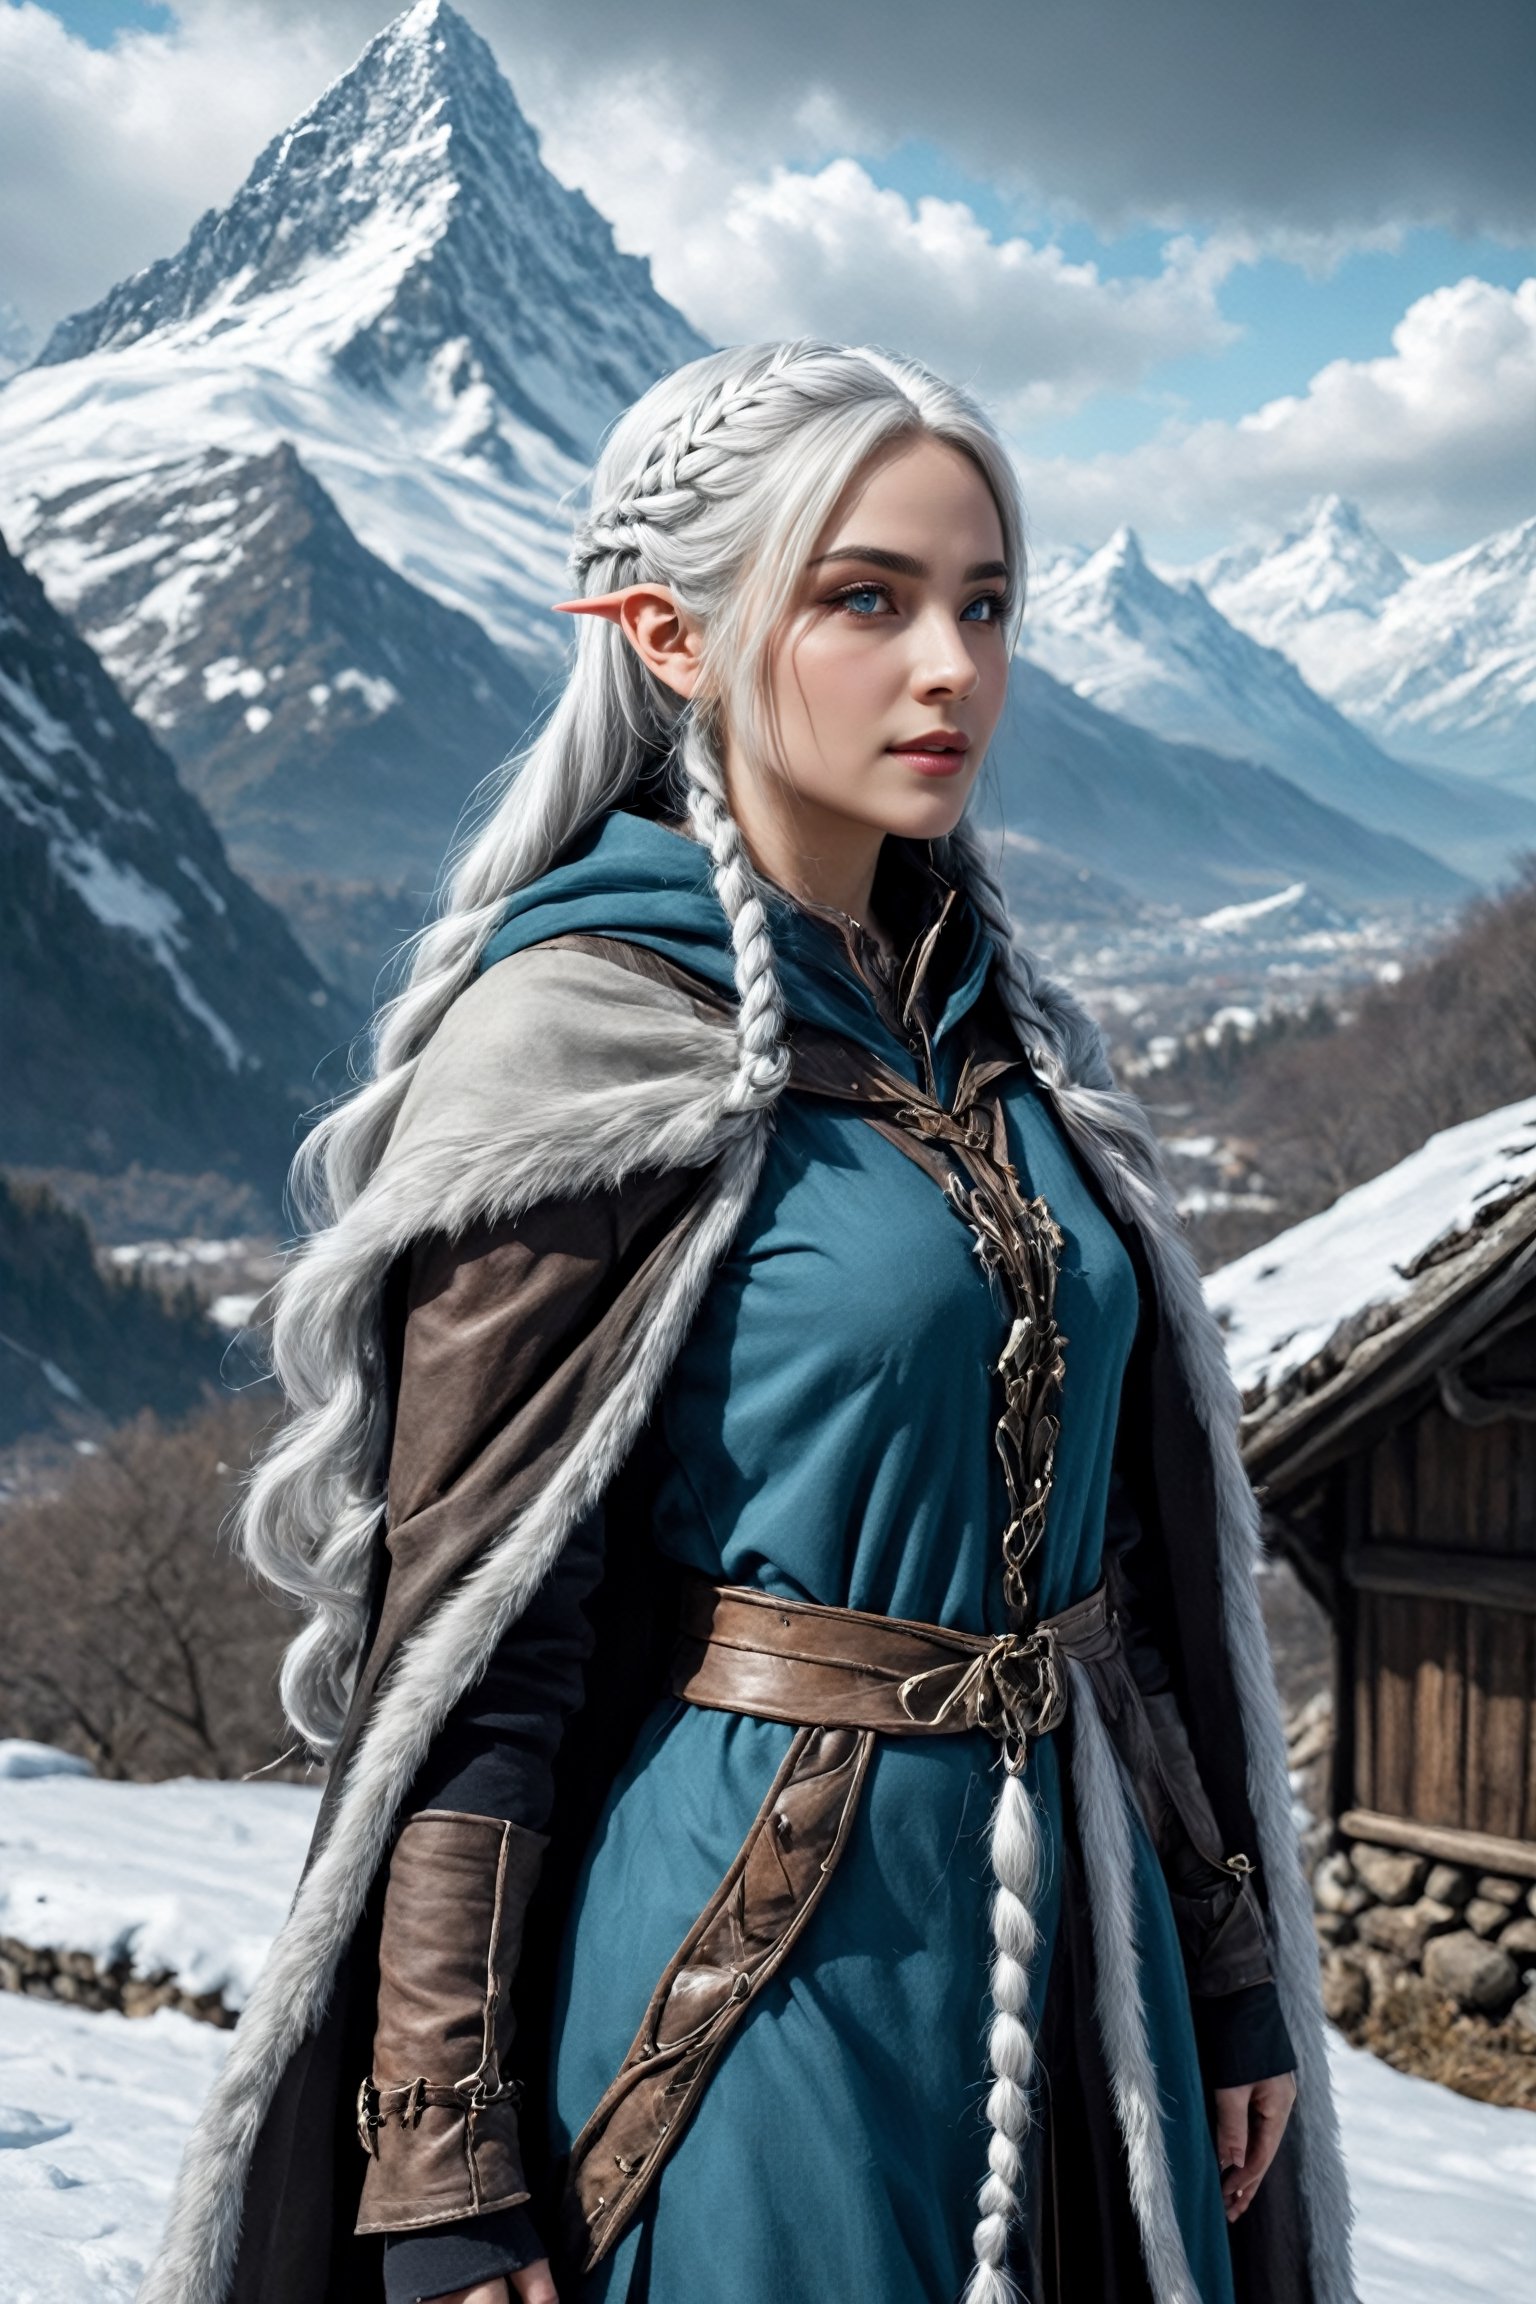 Extreme detailed,ultra Realistic,
beautiful young ELF lady,platinum silver shining hair, long elvish braid, side braid, blue-grey eyes,elf ears,
Wearing leather tunic, hooded cloak, animal fur hood, intricate clothing, animal fur clothing, dark clothing, waistband, scarf, soft smile, bending posture, looking into the distance, 
snowy mountain scenery, overlooking valley, river, white clouds, seen from behind,ol1v1adunne,Eyes